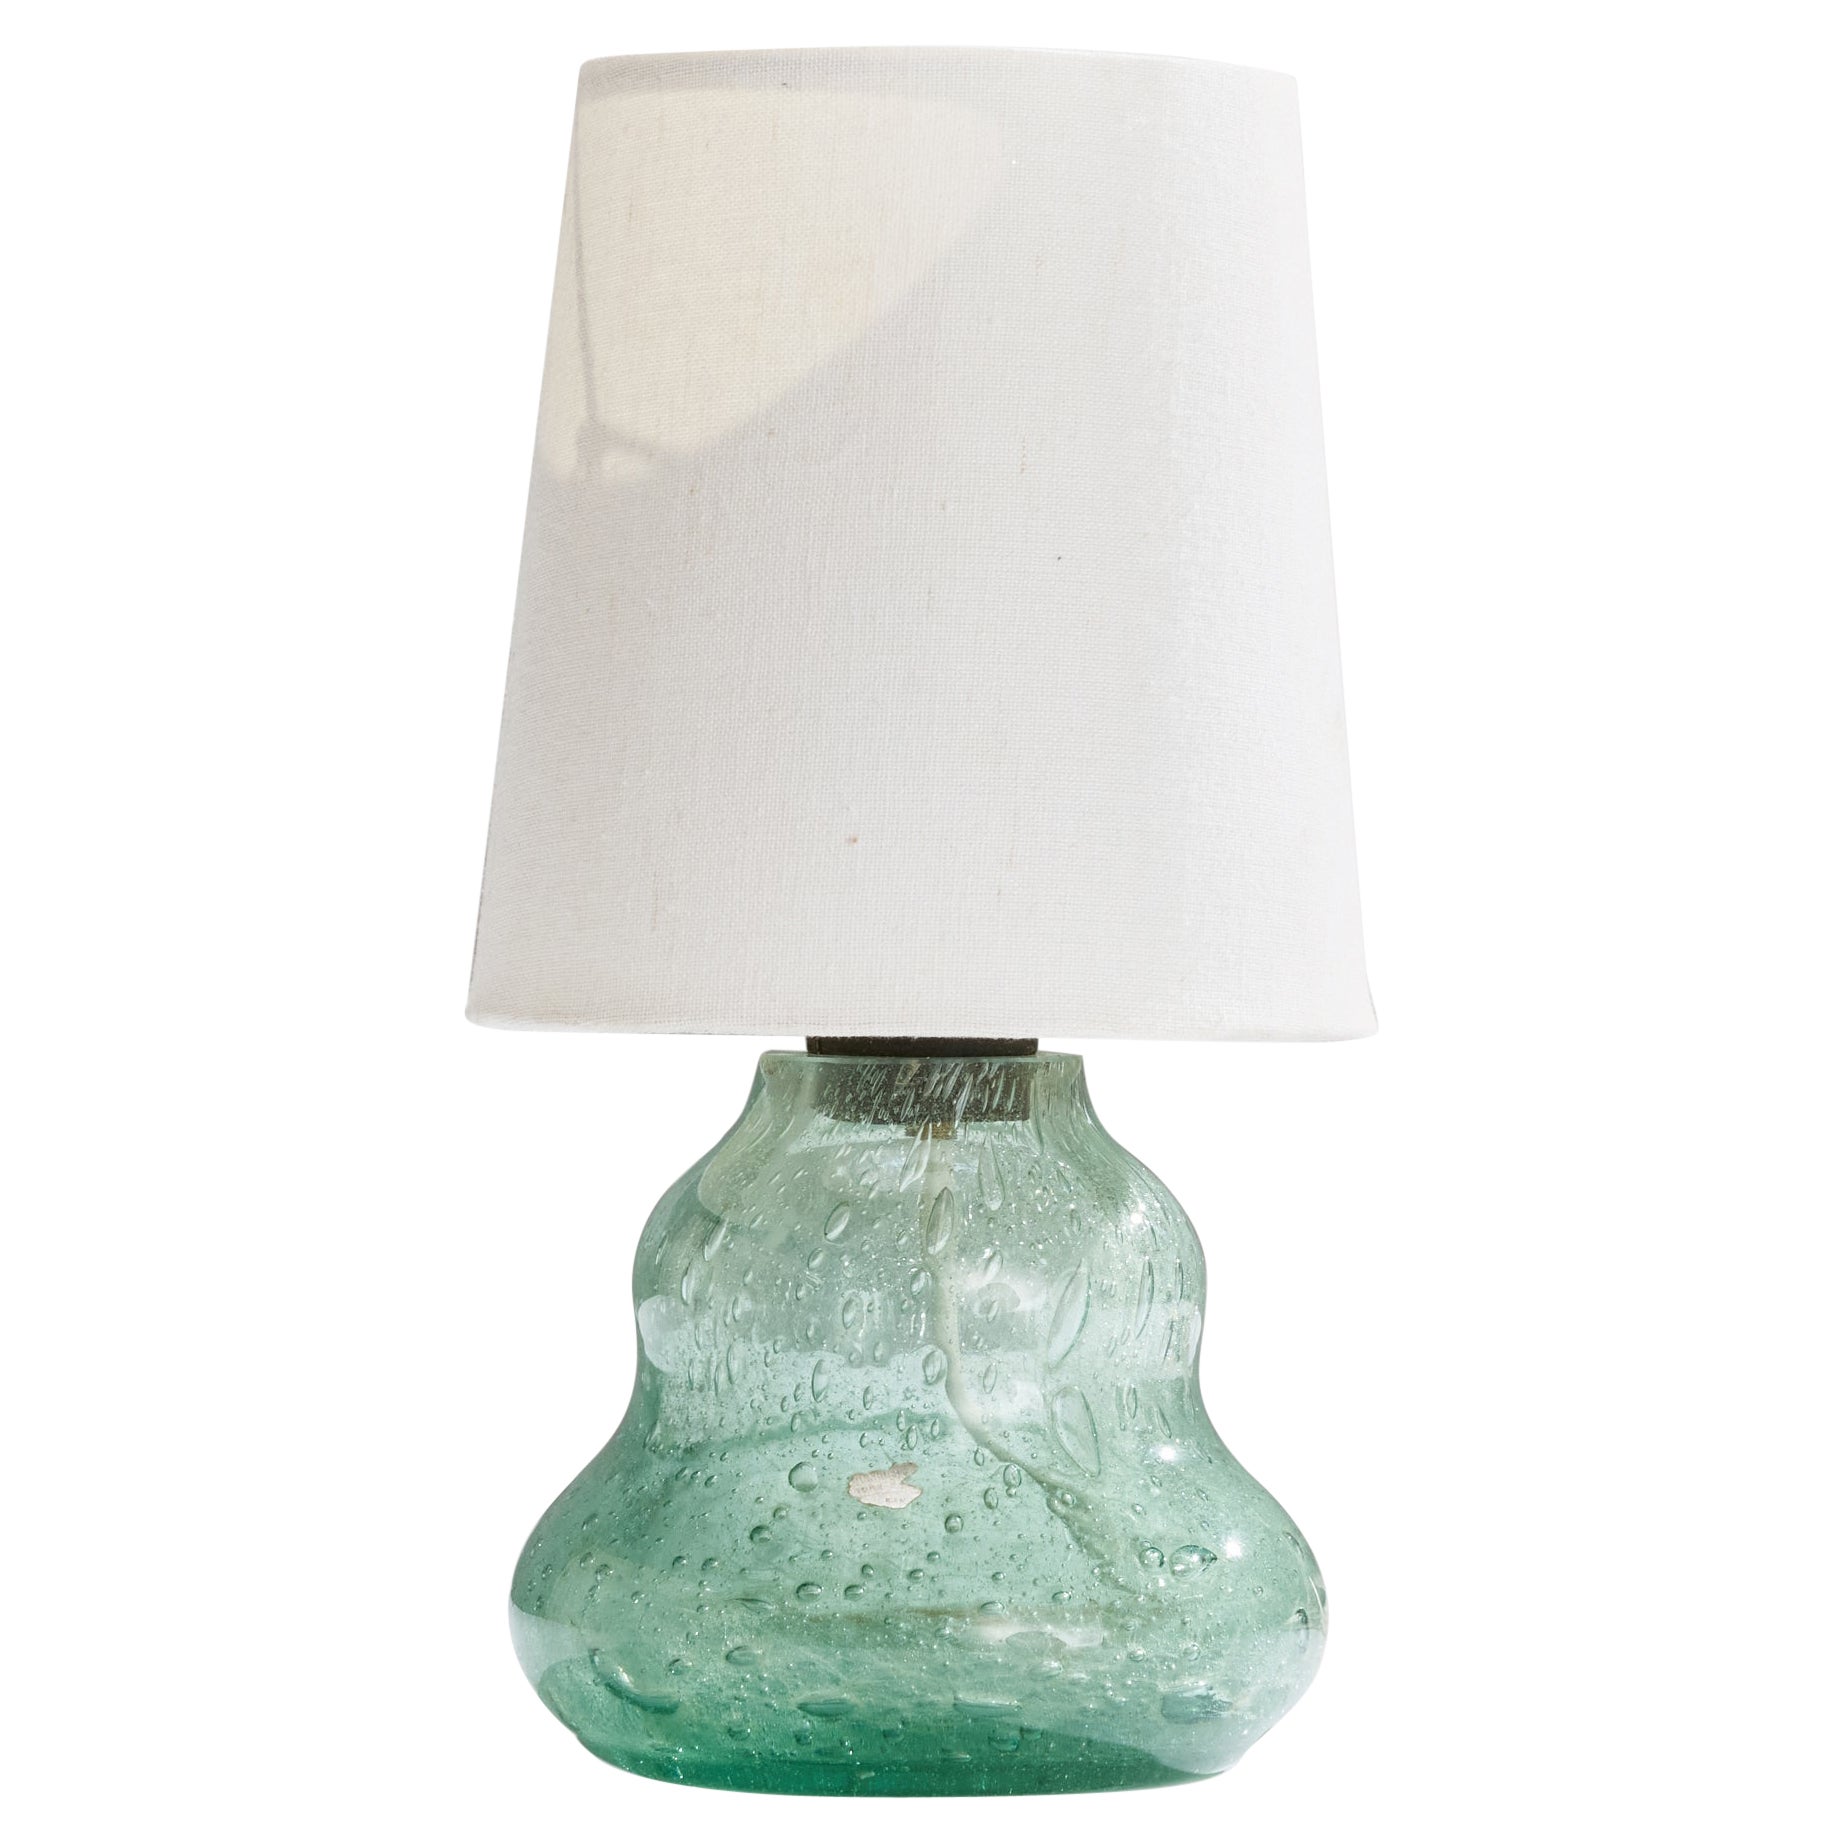 Ture Berglund, Table Lamp, Glass, Brass, Fabric, Sweden, 1940s For Sale